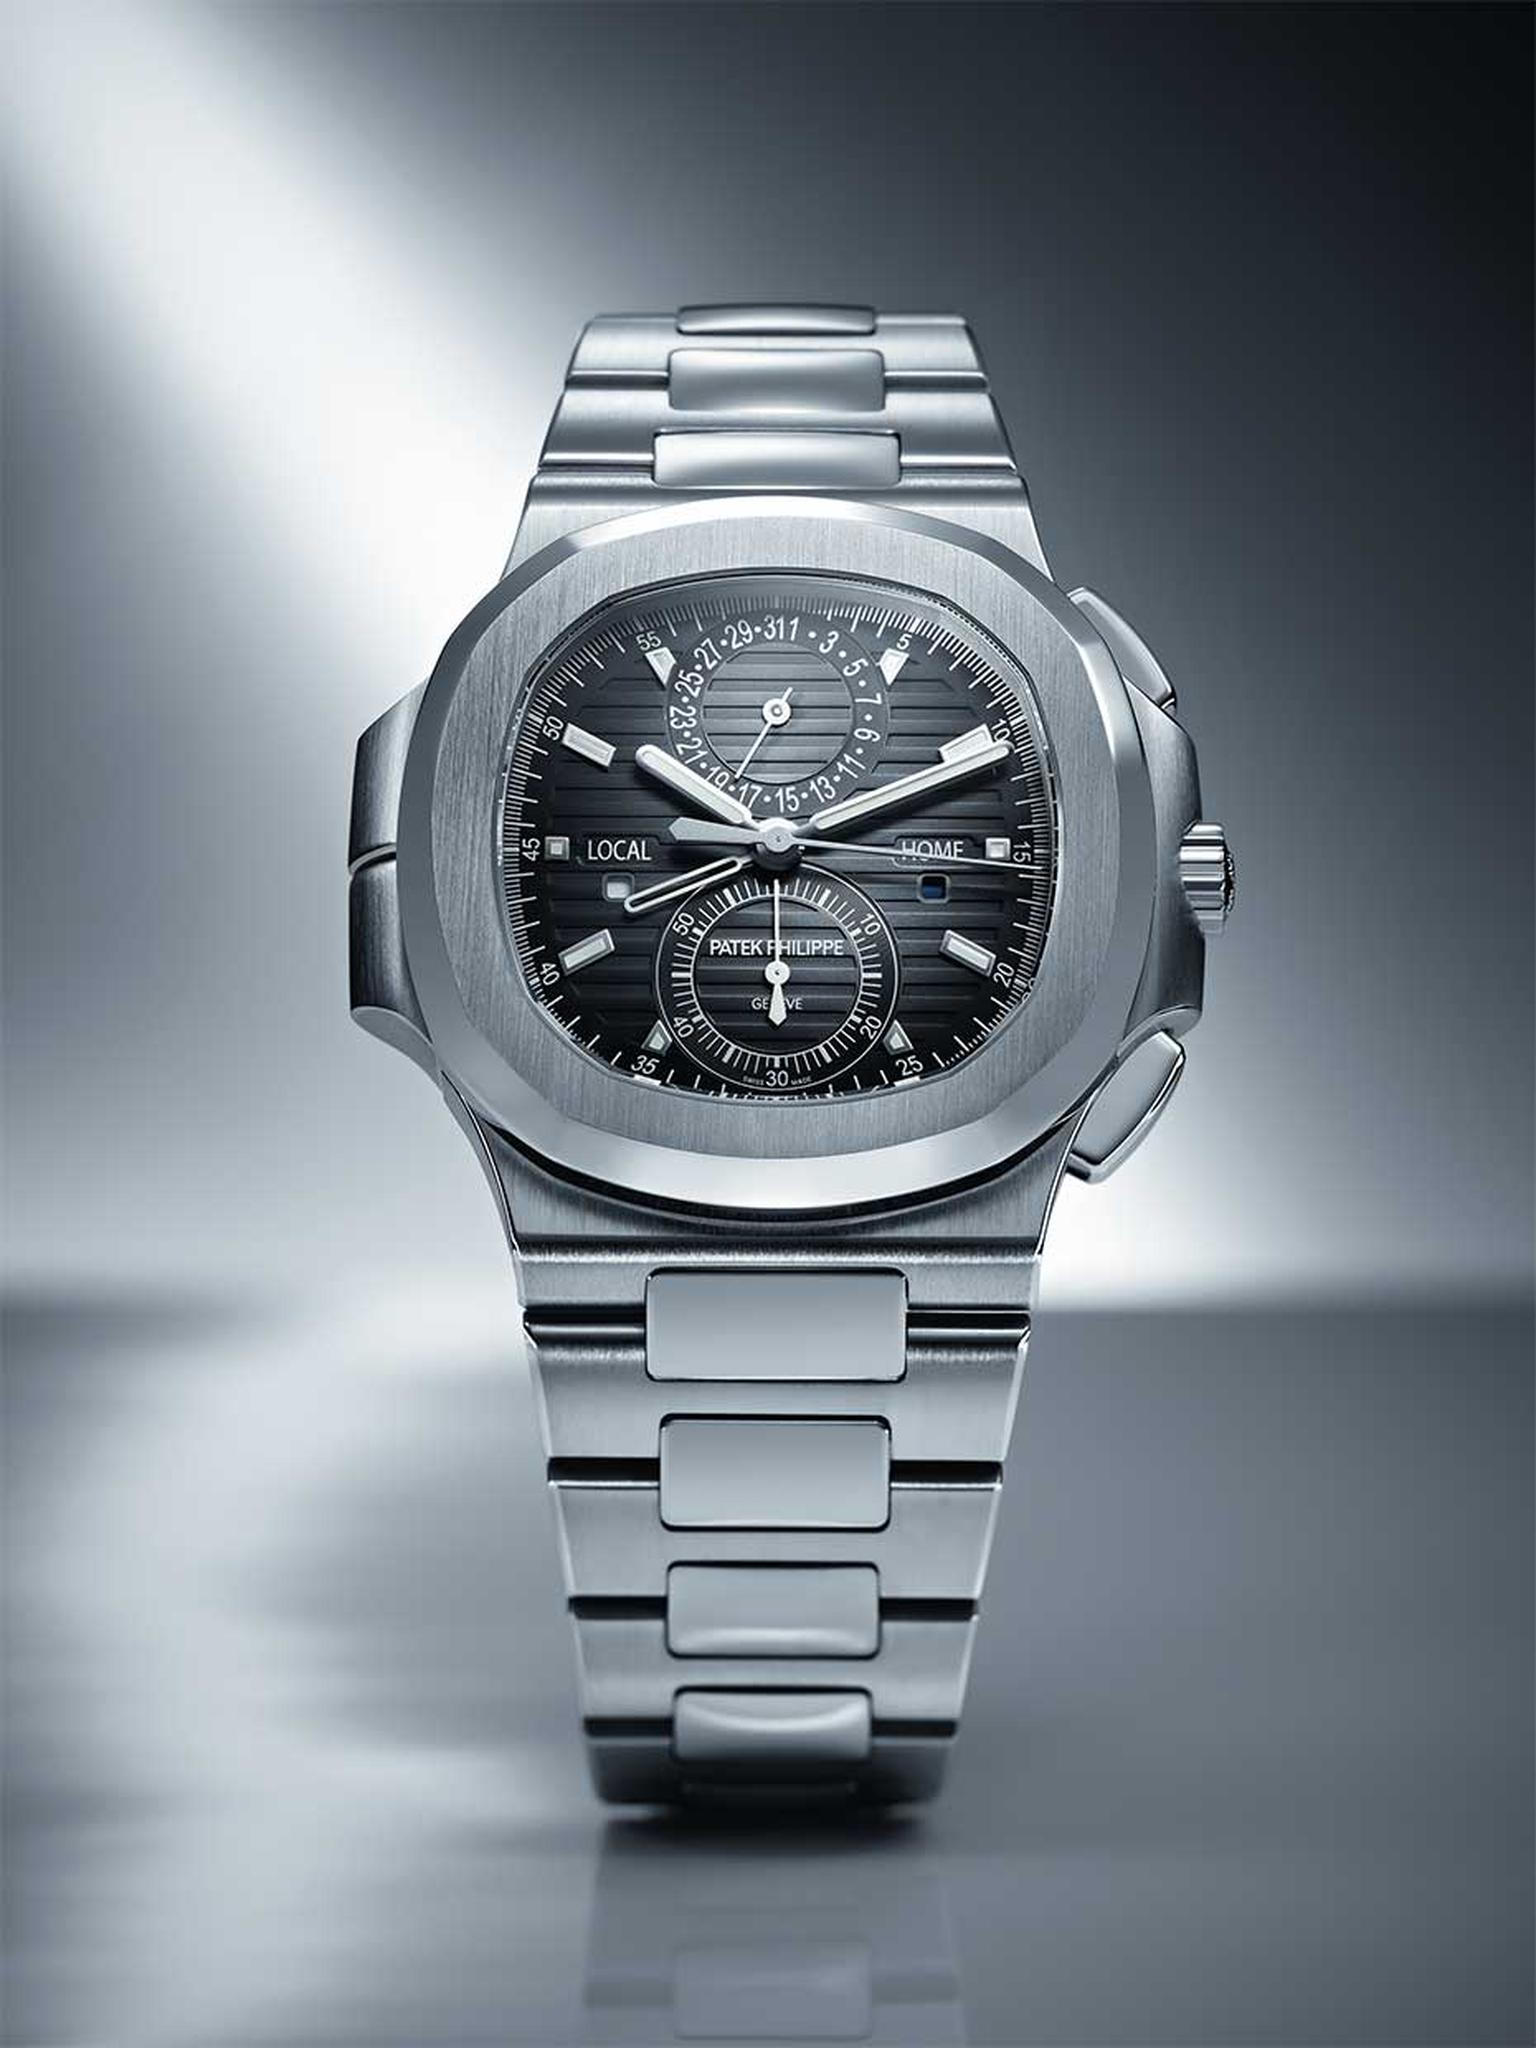 The Patek Philippe 5990 Nautilus Travel Time Chronograph watch features a pusher system for the second time zone, which has been carefully integrated on the left side of the case.